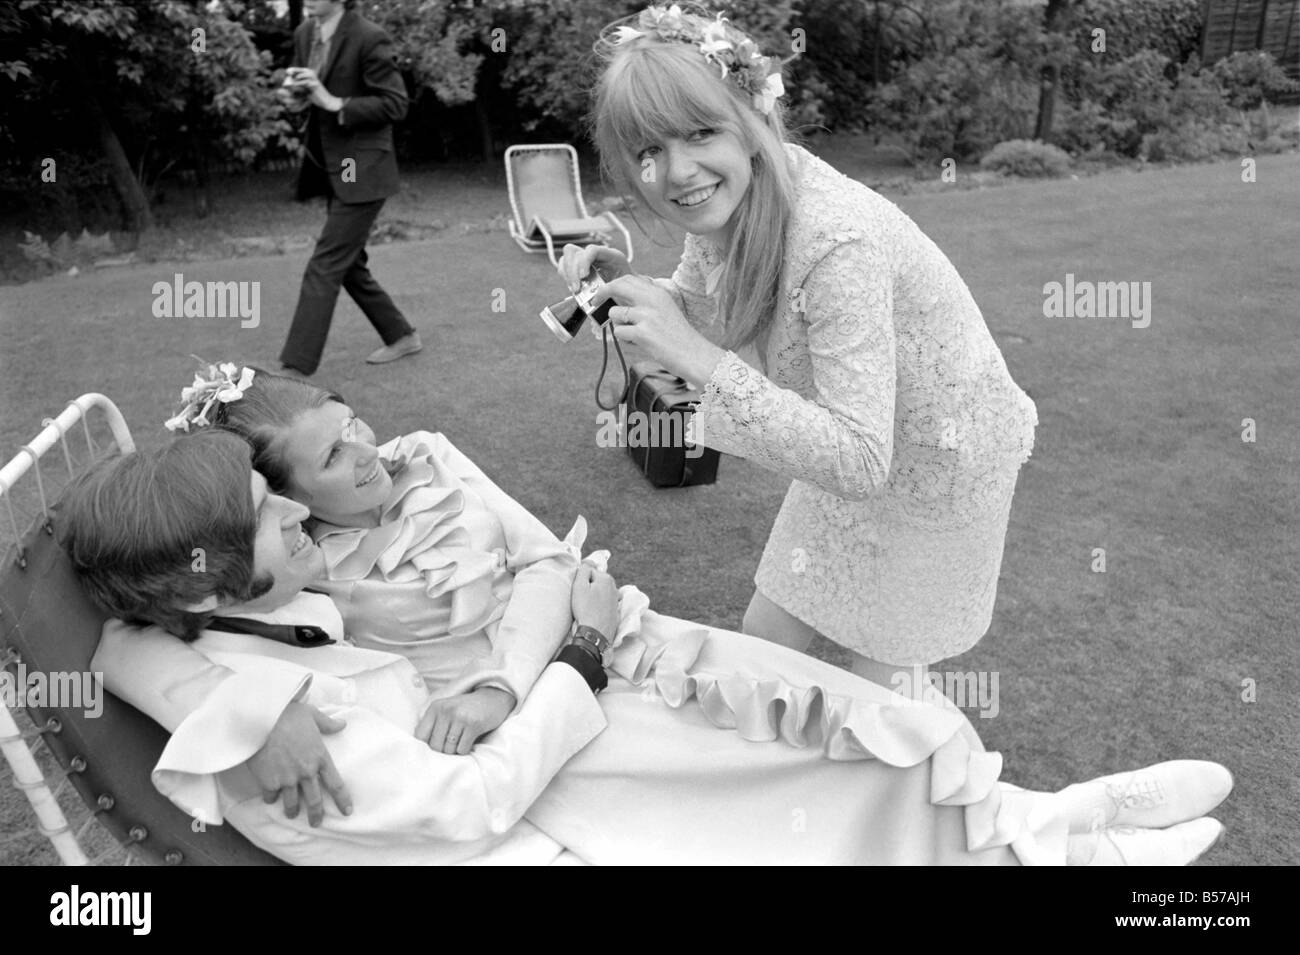 Mike McCartney's Wedding. Jane Asher takes a photograph of the bride and groom Mike McGear and Angela Fishwick. June 1968 Stock Photo